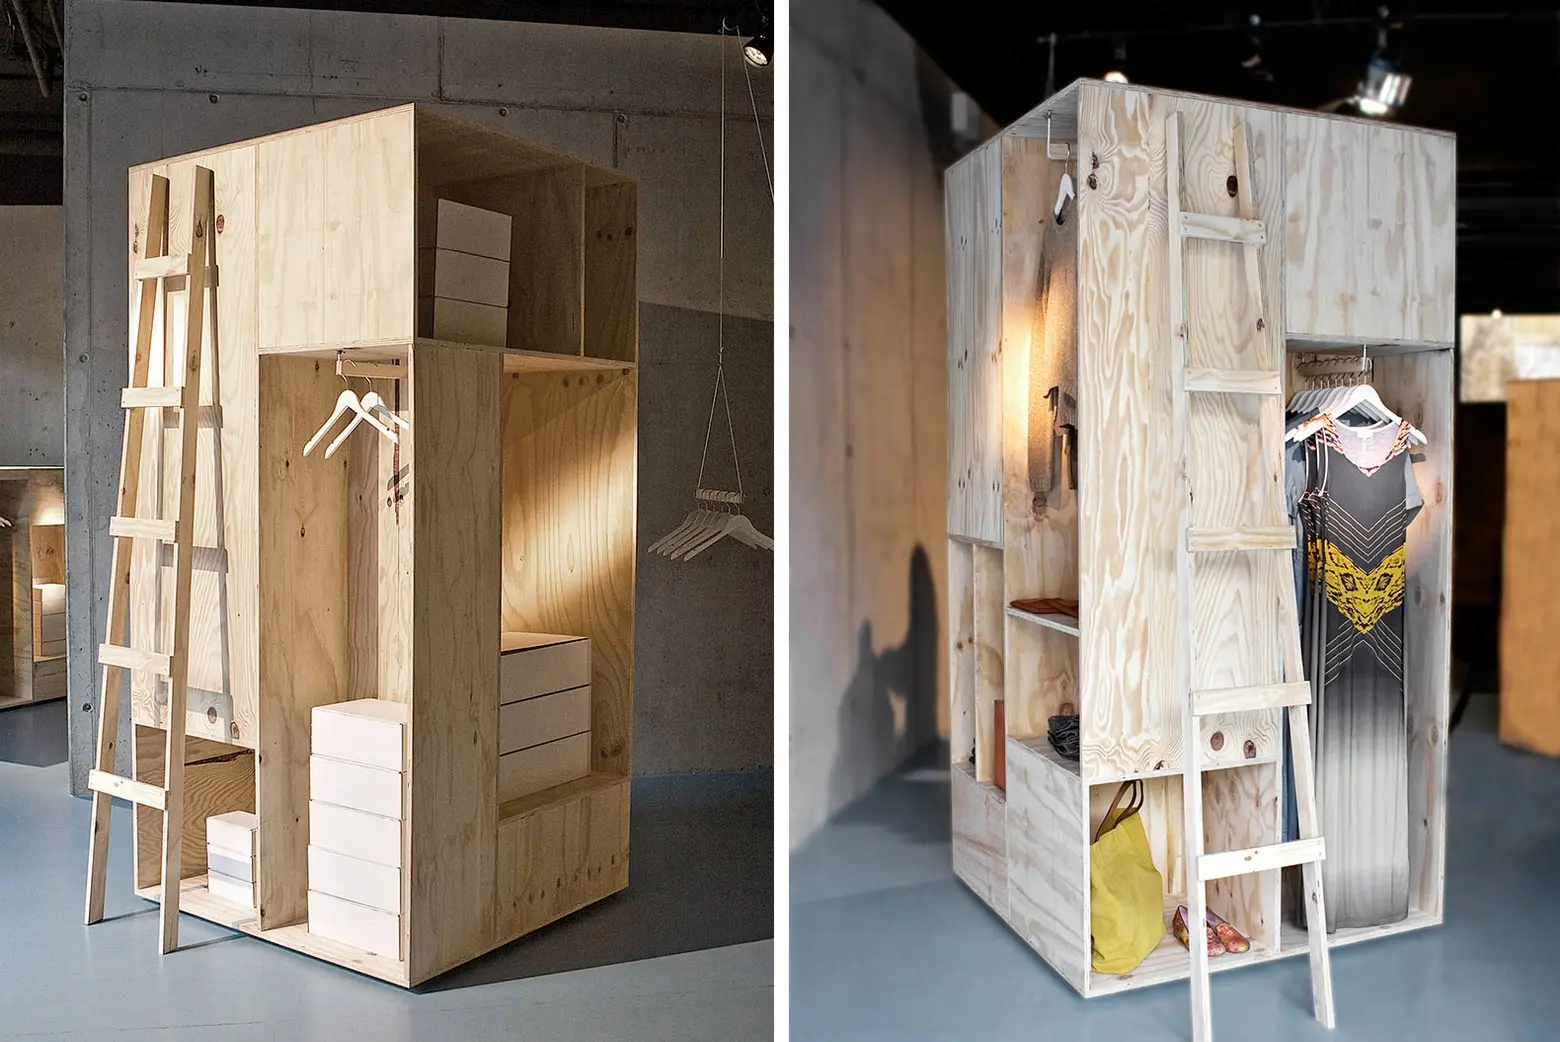 Sigurd Larsen, wooden wardrobes, Berlin, wooden shipping containers, shipping crates,